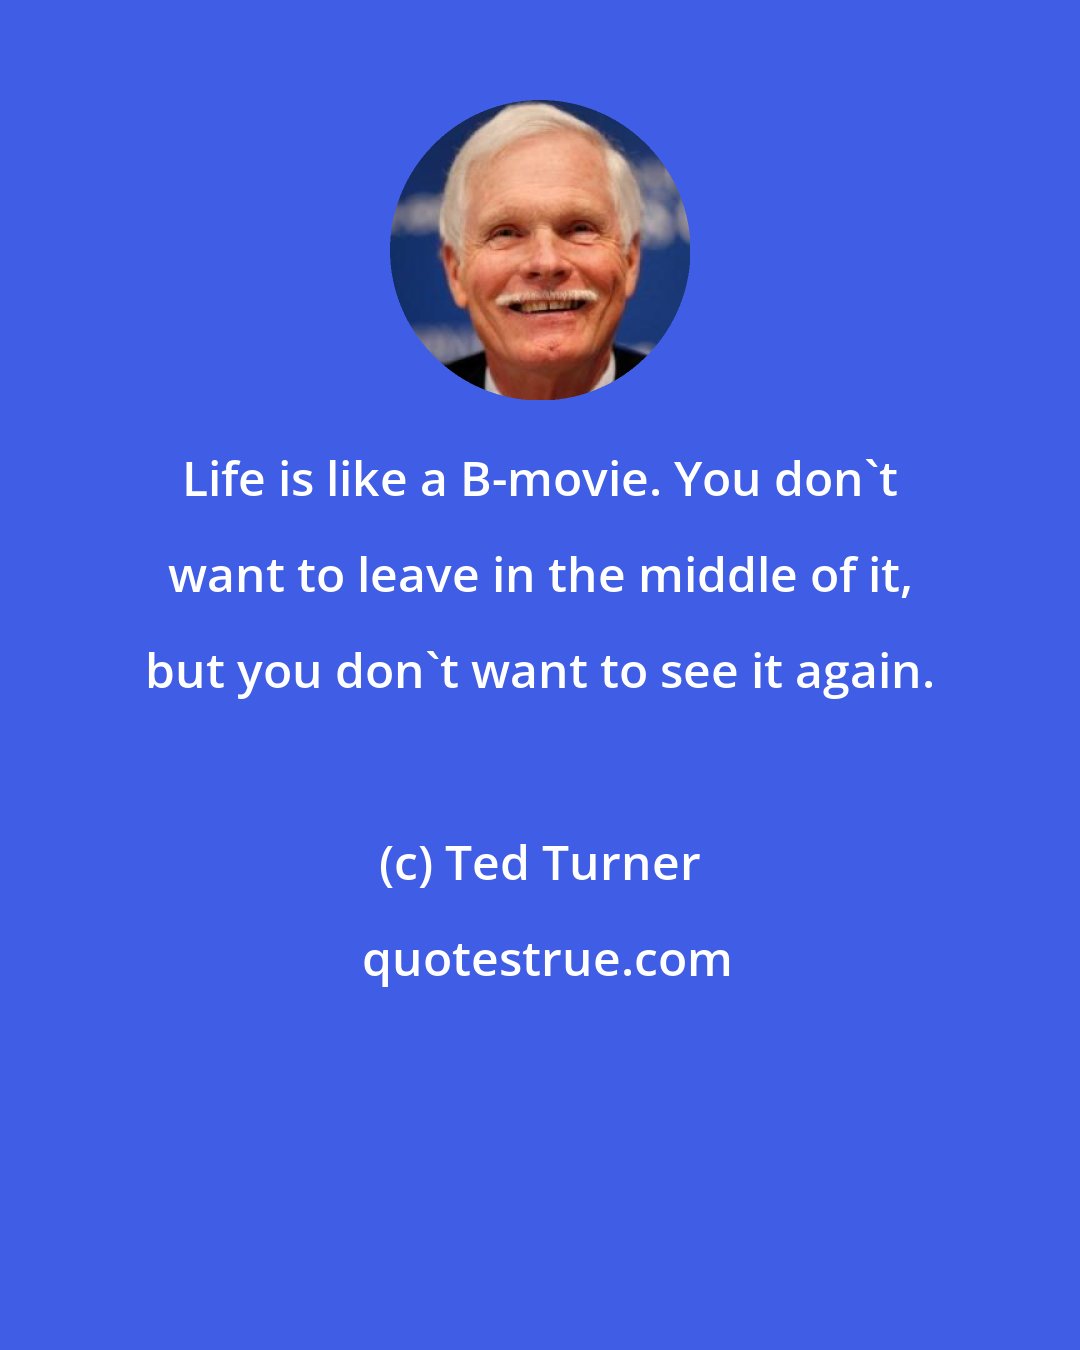 Ted Turner: Life is like a B-movie. You don't want to leave in the middle of it, but you don't want to see it again.